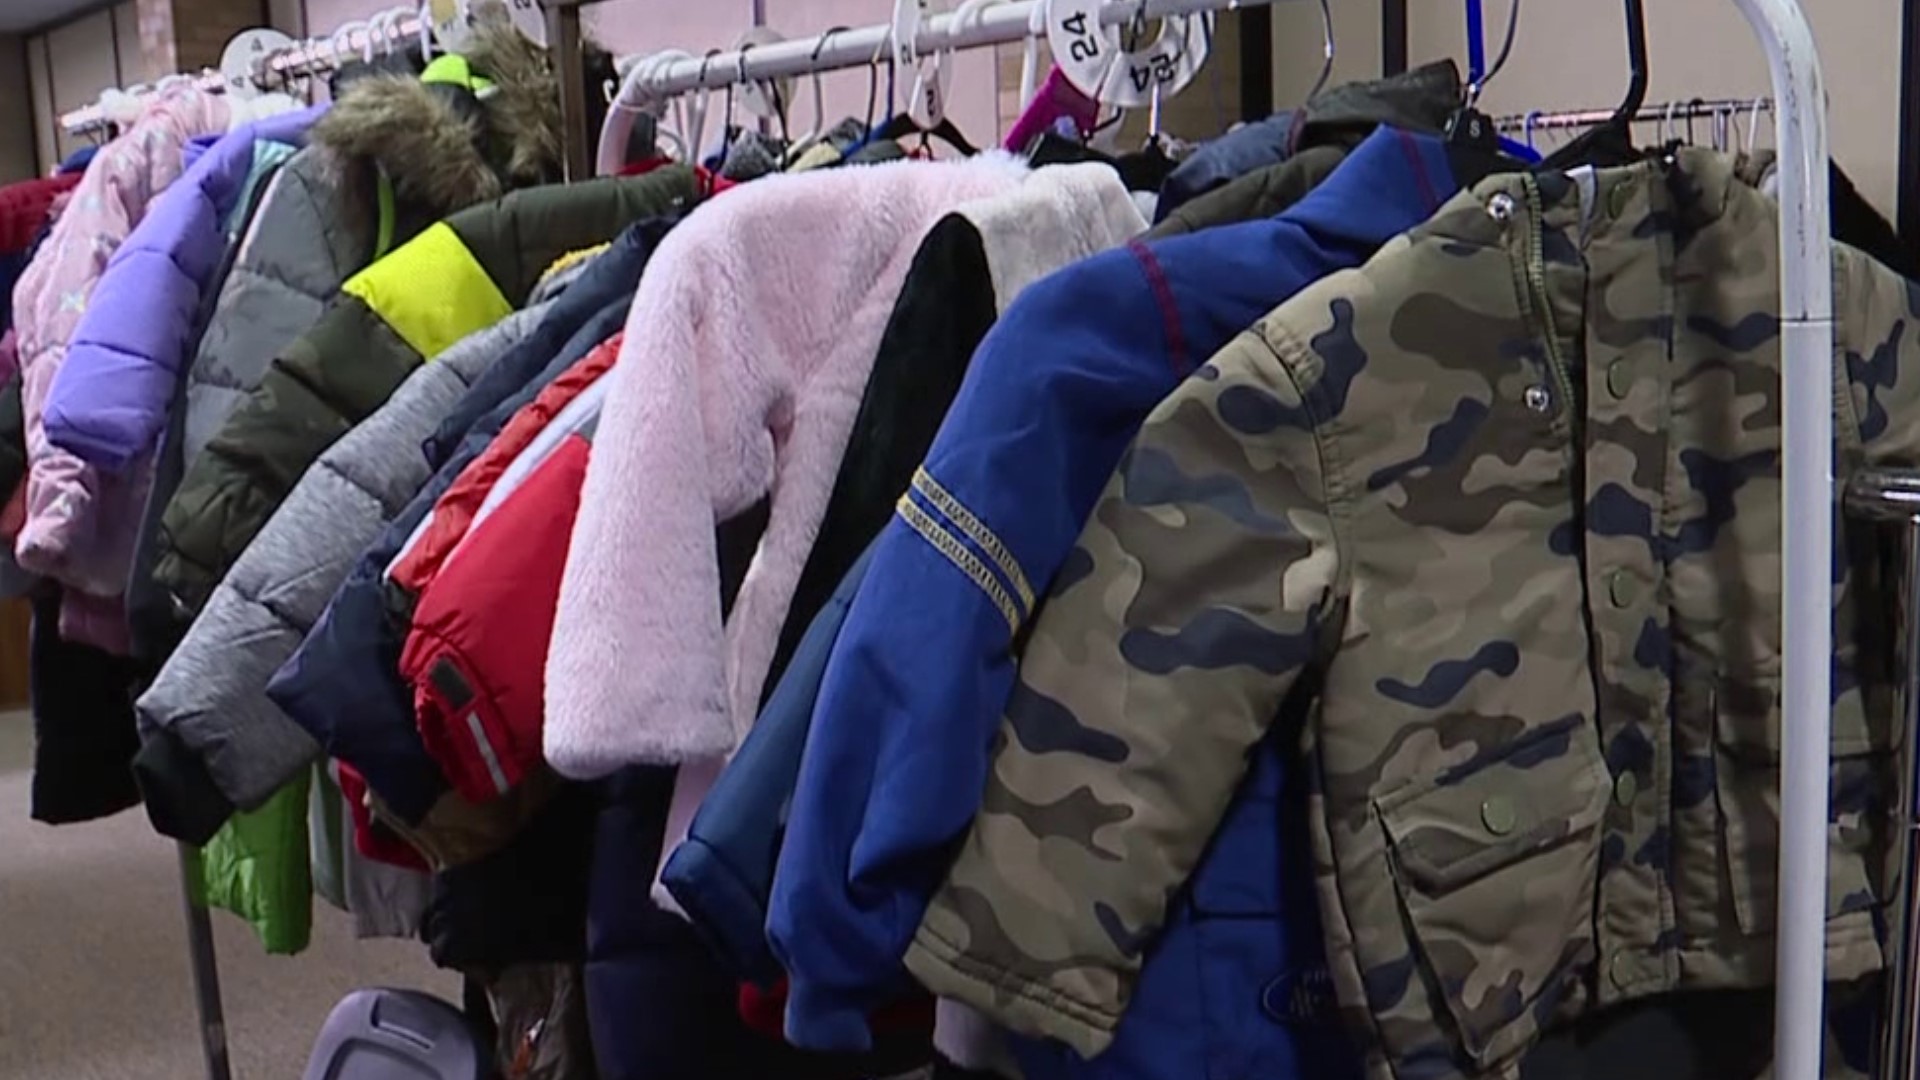 An organization in Williamsport wants to make sure no child or adult goes without a coat this winter.